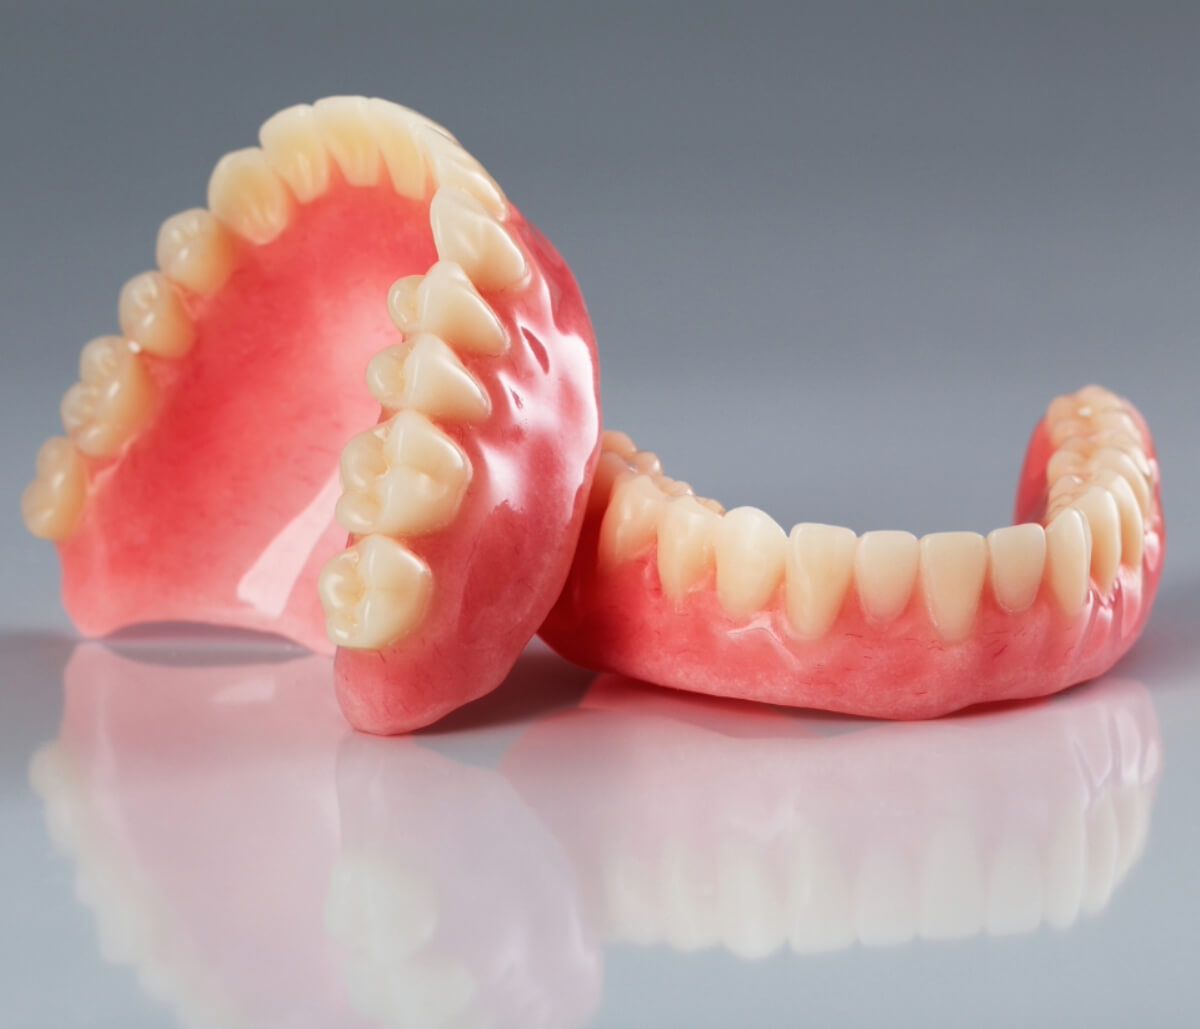 Natural Looking Dentures in Houston TX area